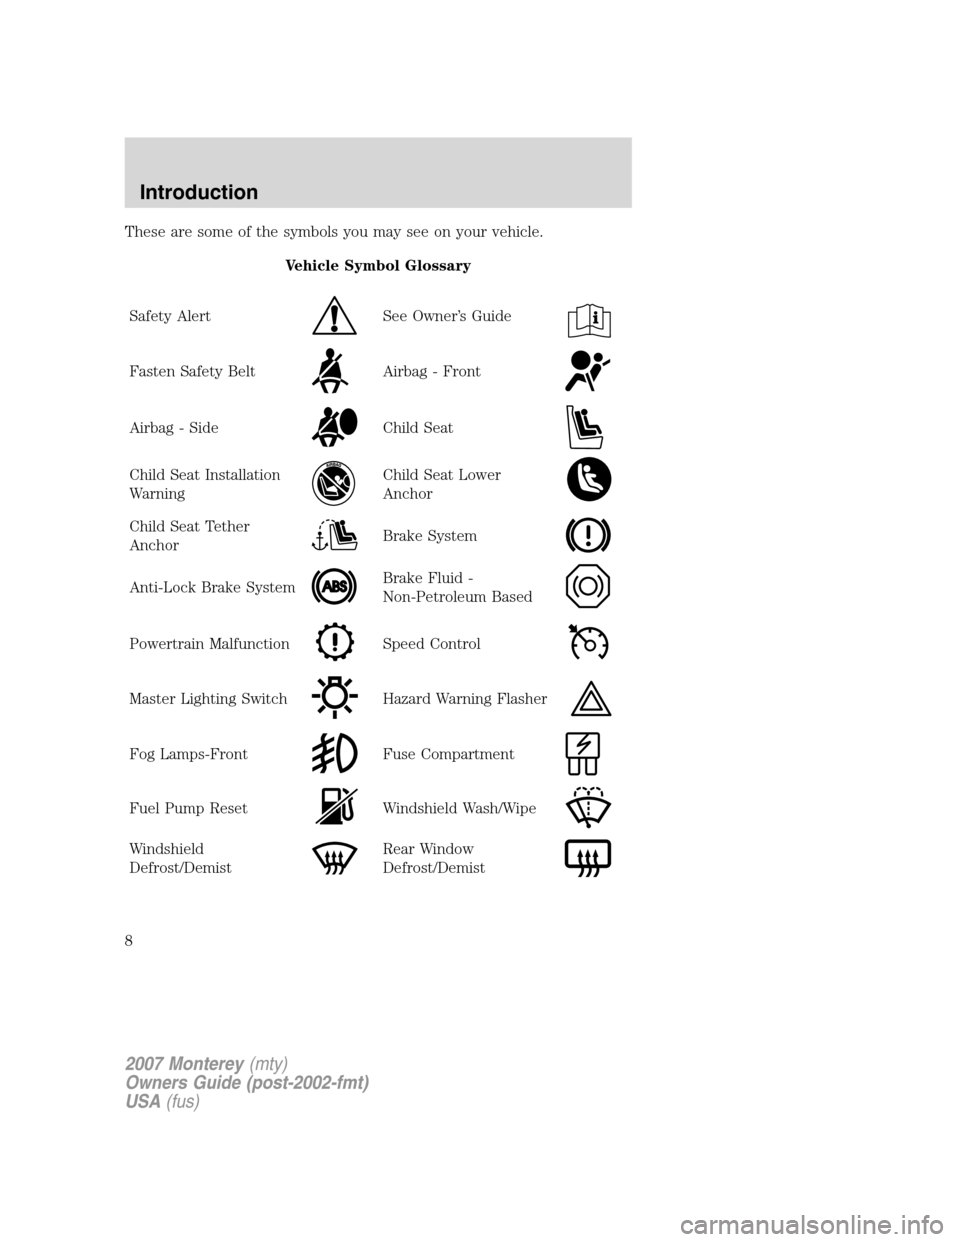 Mercury Monterey 2007  Owners Manuals These are some of the symbols you may see on your vehicle.
Vehicle Symbol Glossary
Safety Alert
See Owner’s Guide
Fasten Safety BeltAirbag - Front
Airbag - SideChild Seat
Child Seat Installation
War